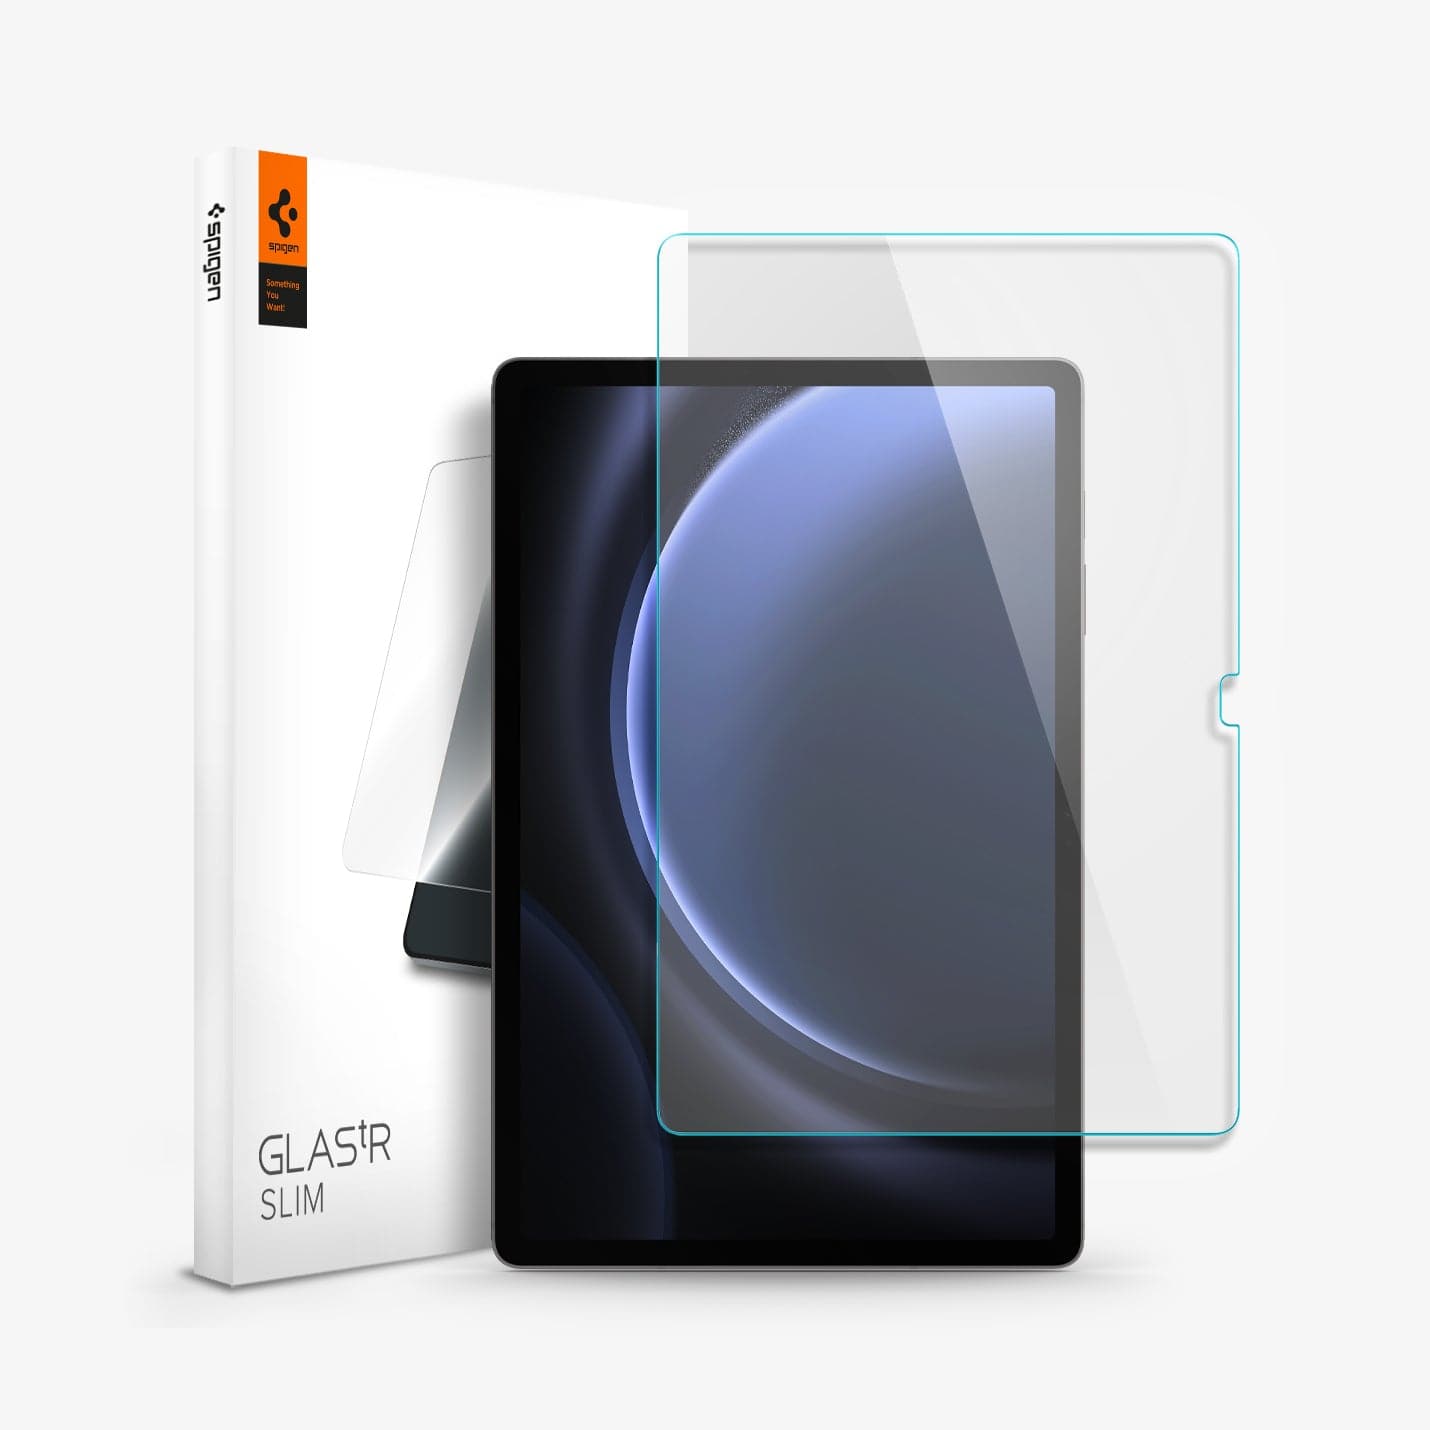 AGL07001 - Galaxy Tab S9 FE+ Series Screen Protector EZ FIT GLAS.tR showing the device, screen protector and packaging